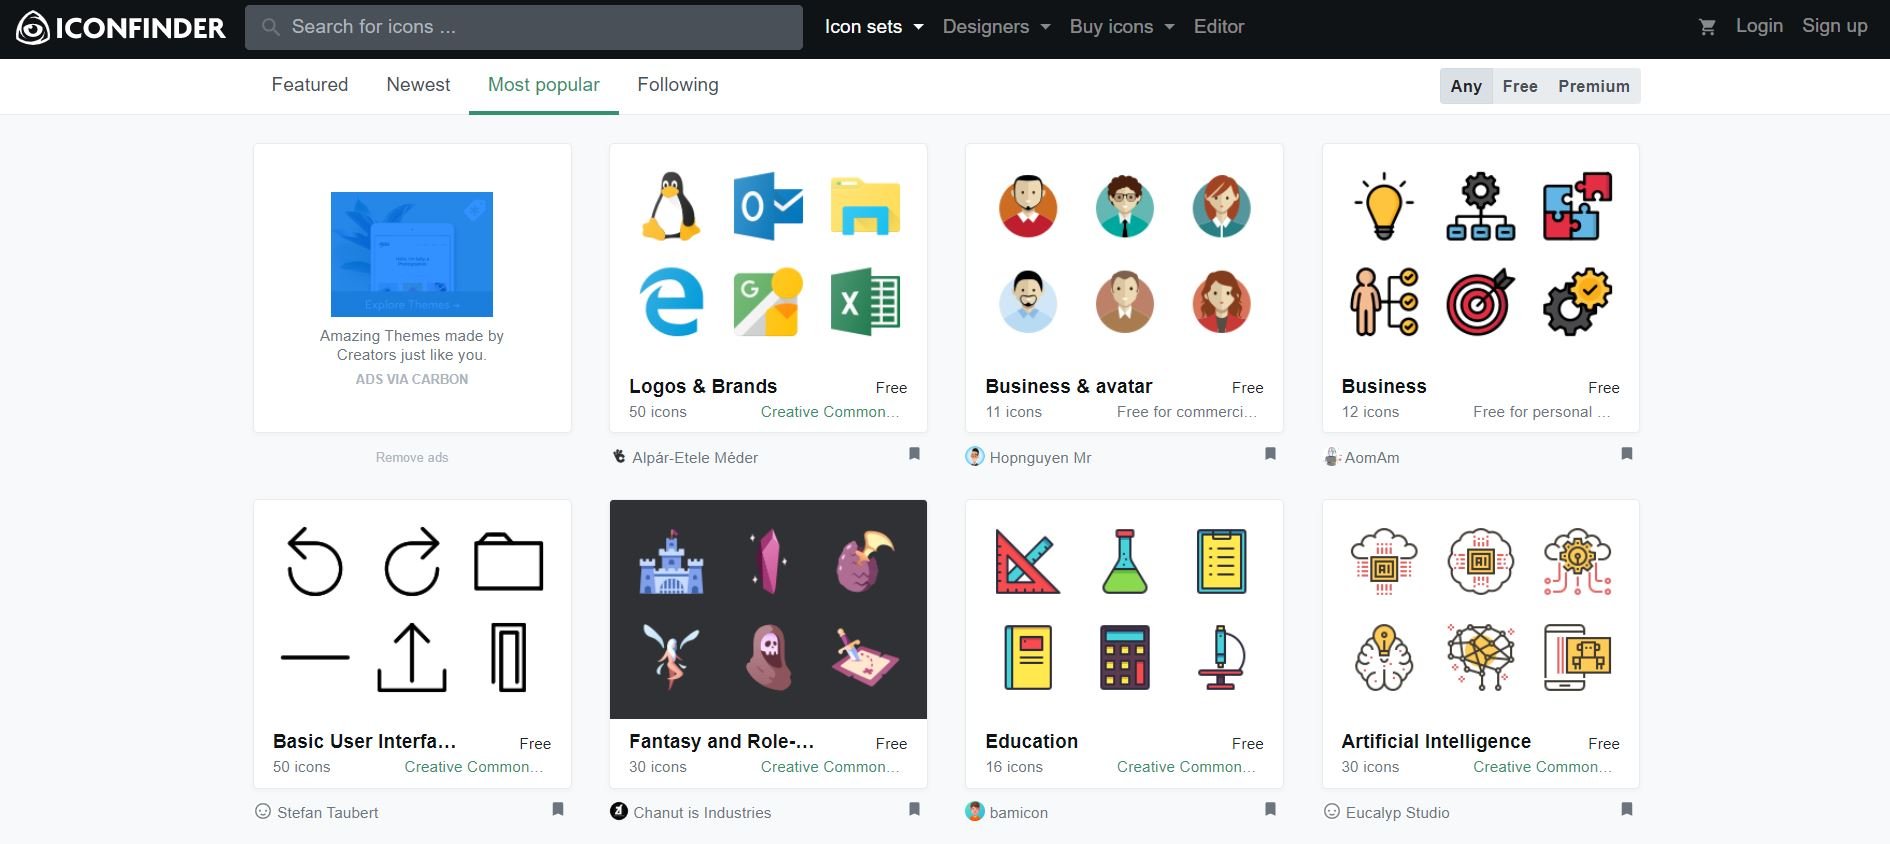 Download 13 Websites to Download Free Icons for Android and iOS Apps